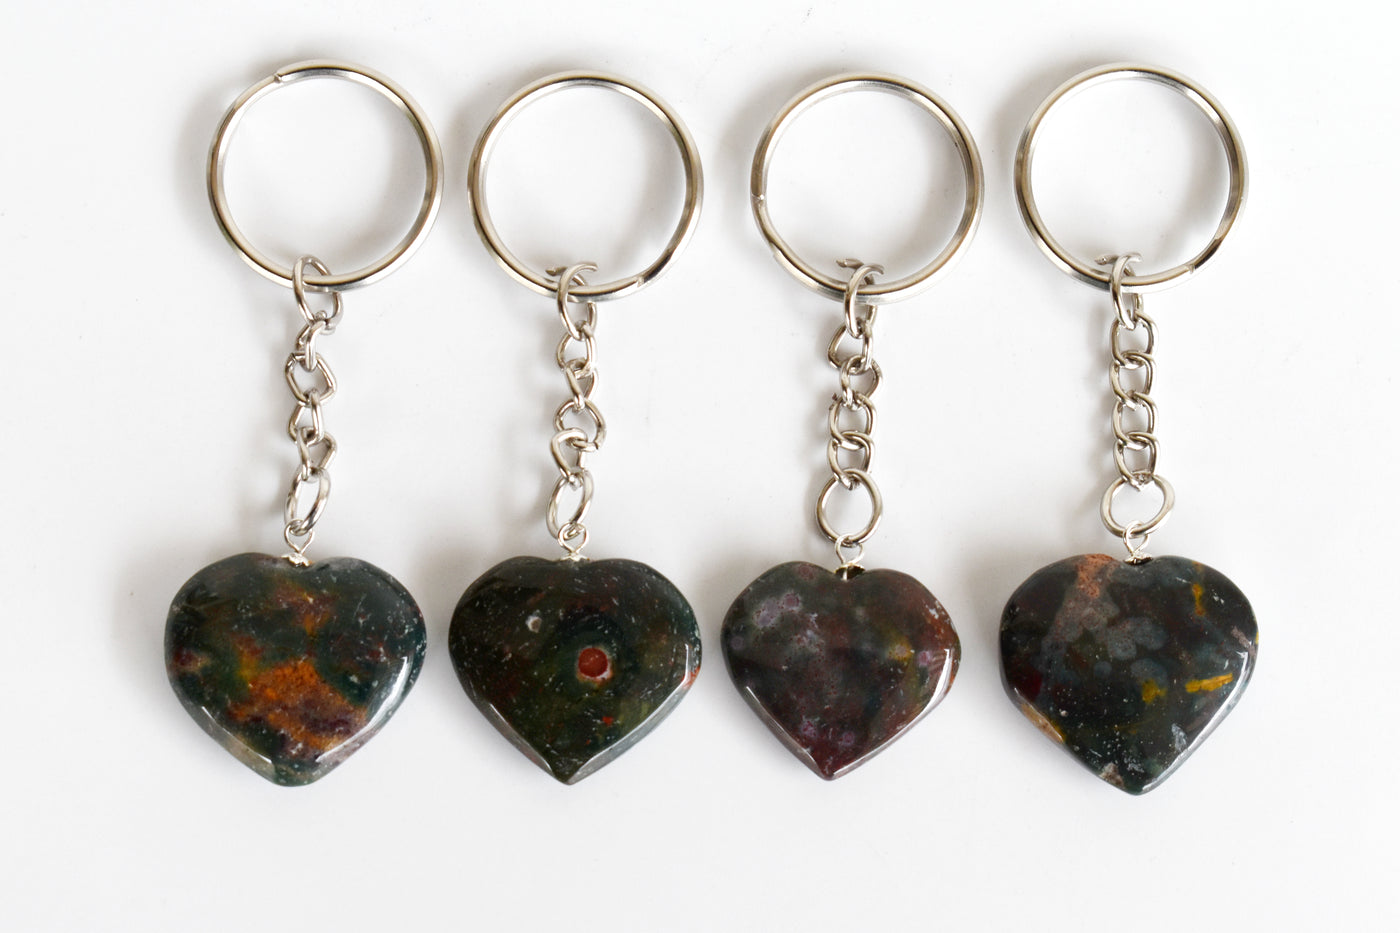 Bloodstone Key Chain, Gemstone Keychain Crystal Key Ring (Altruism and Cleansing)